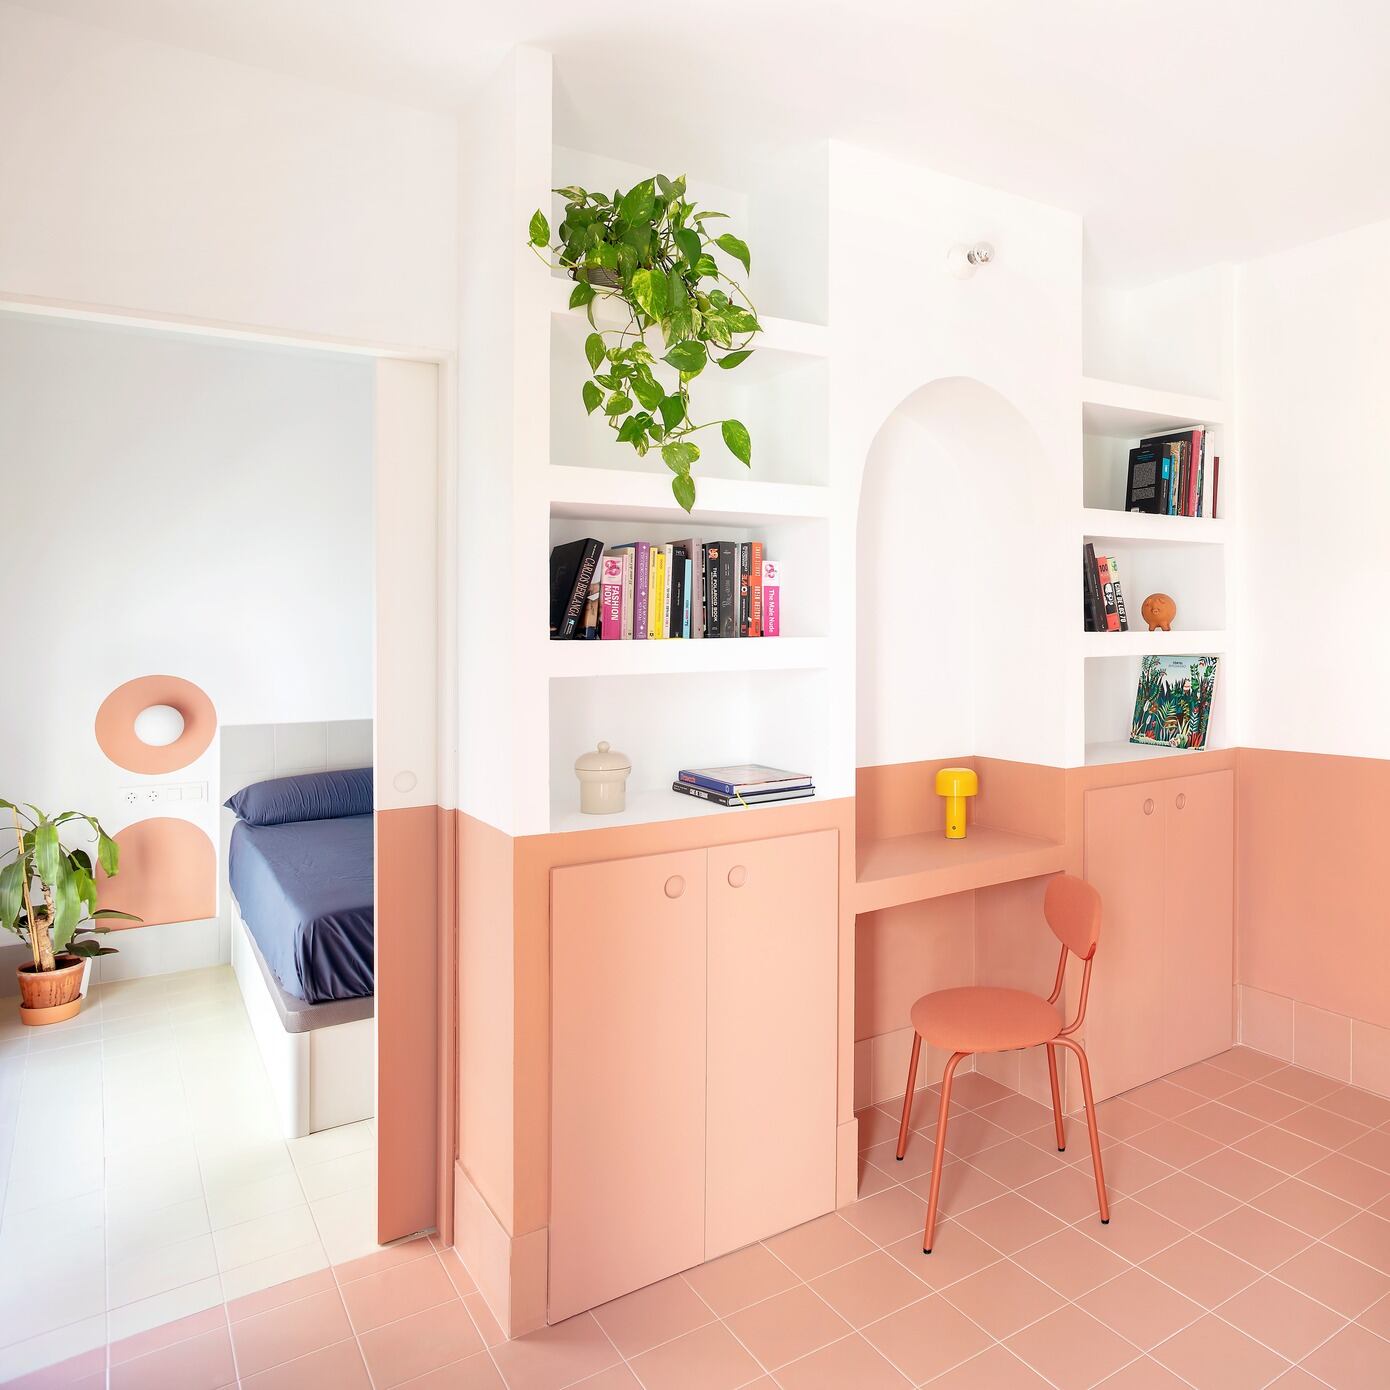 3 in 1 House: Valencia’s Flexible Living Space